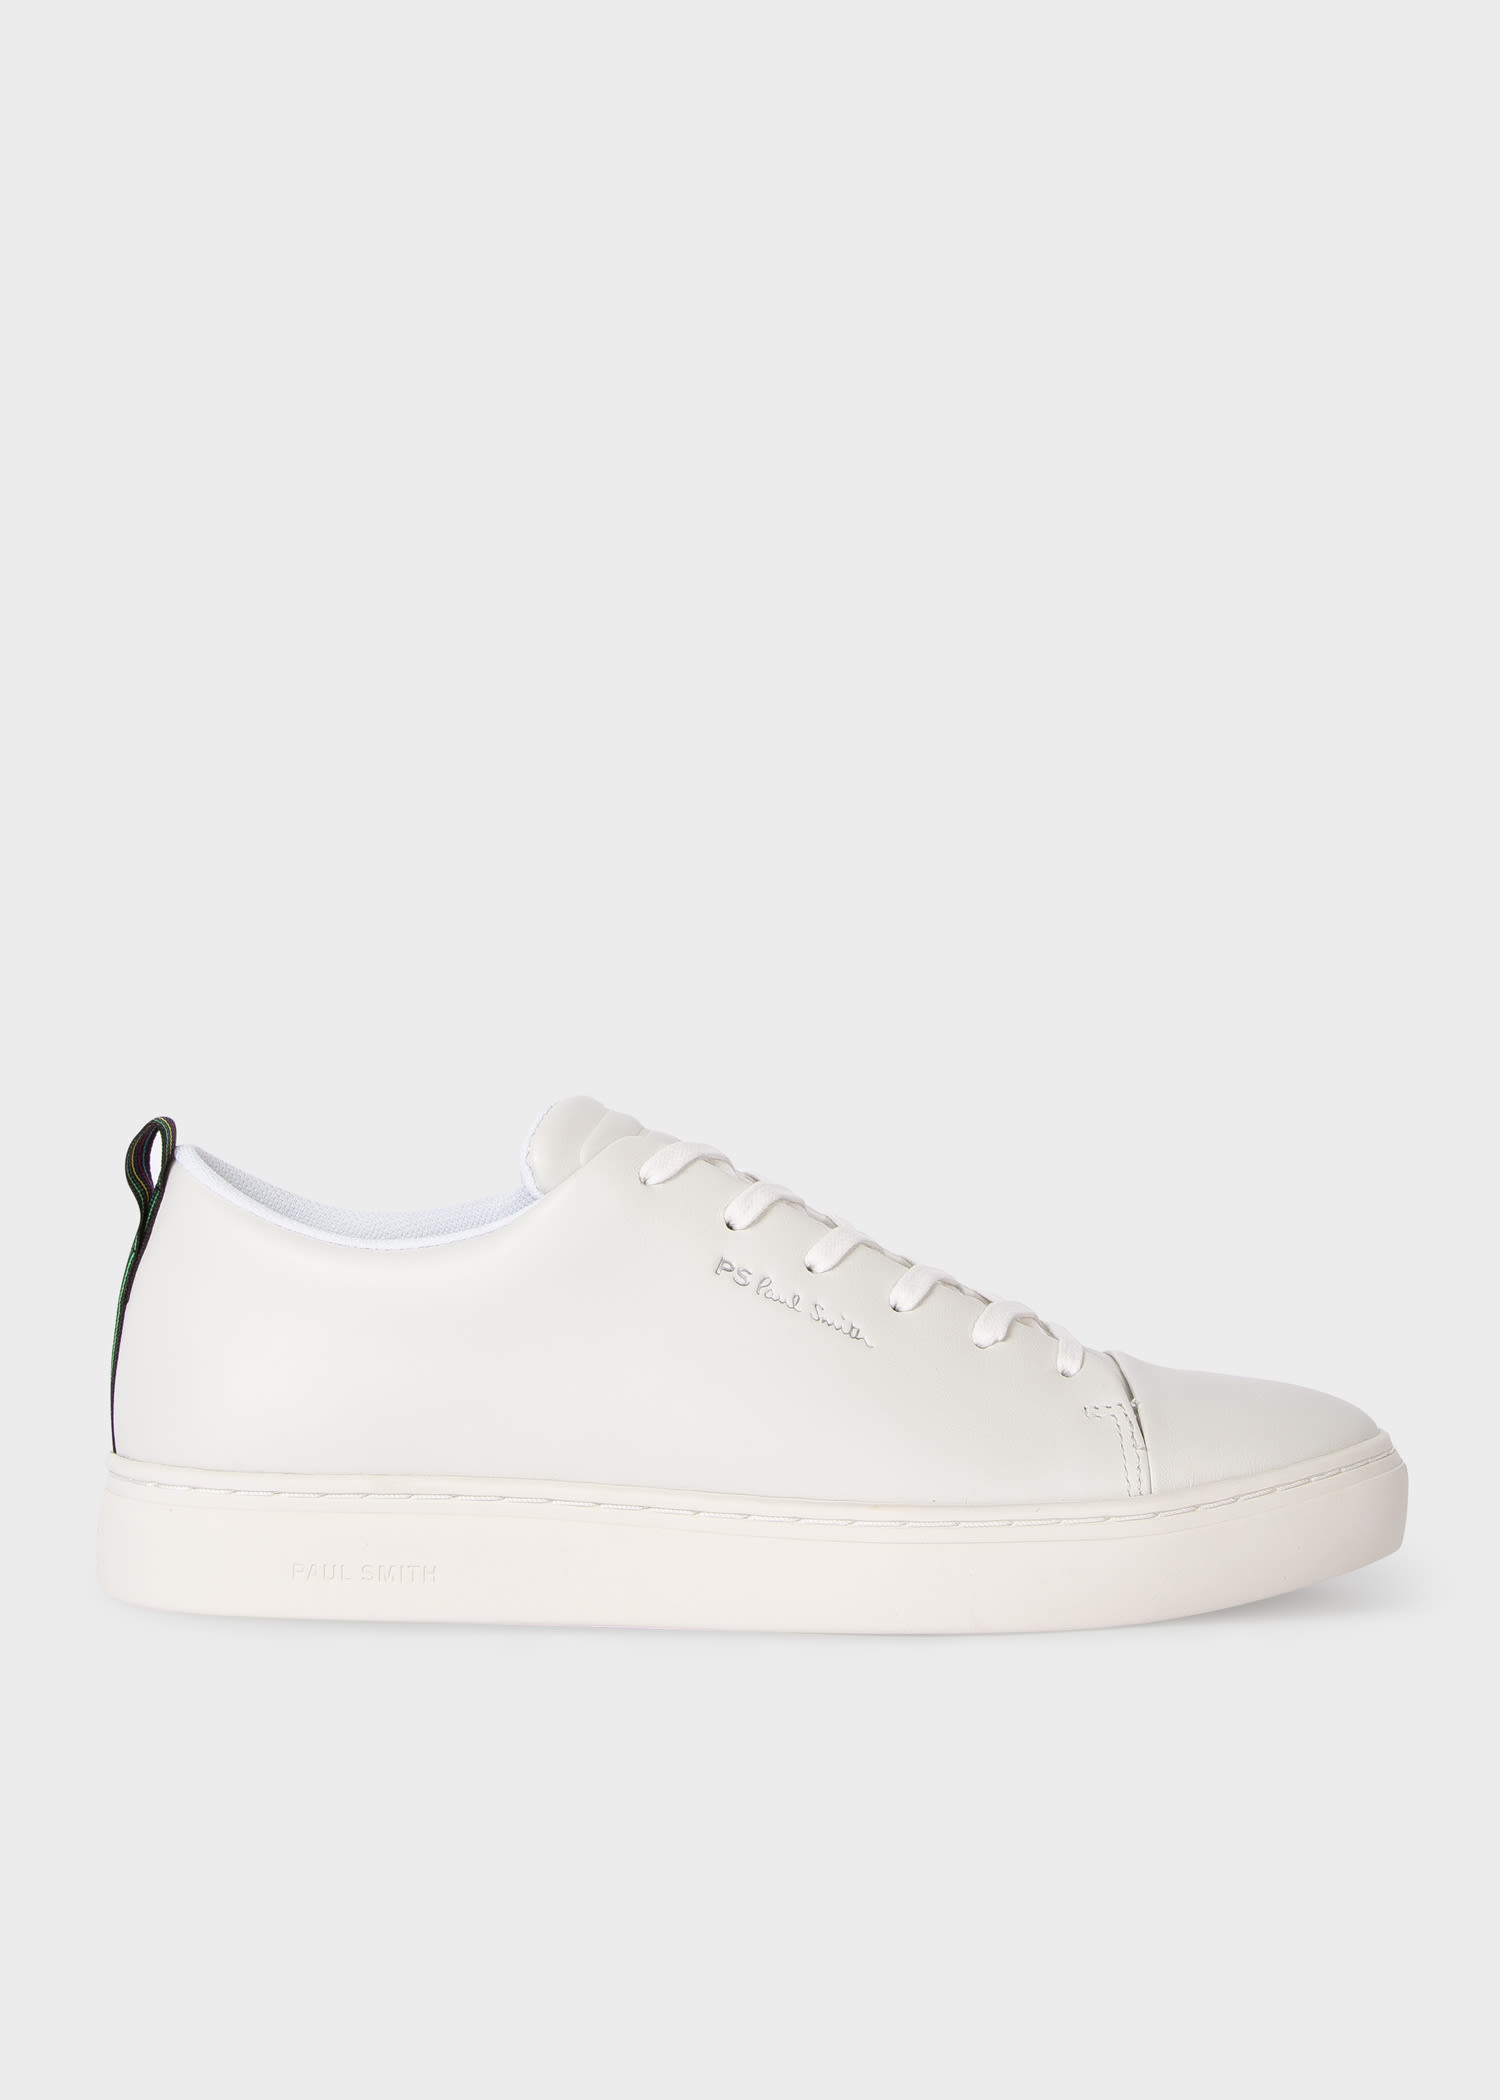 Men's White Leather 'Lee' Trainers